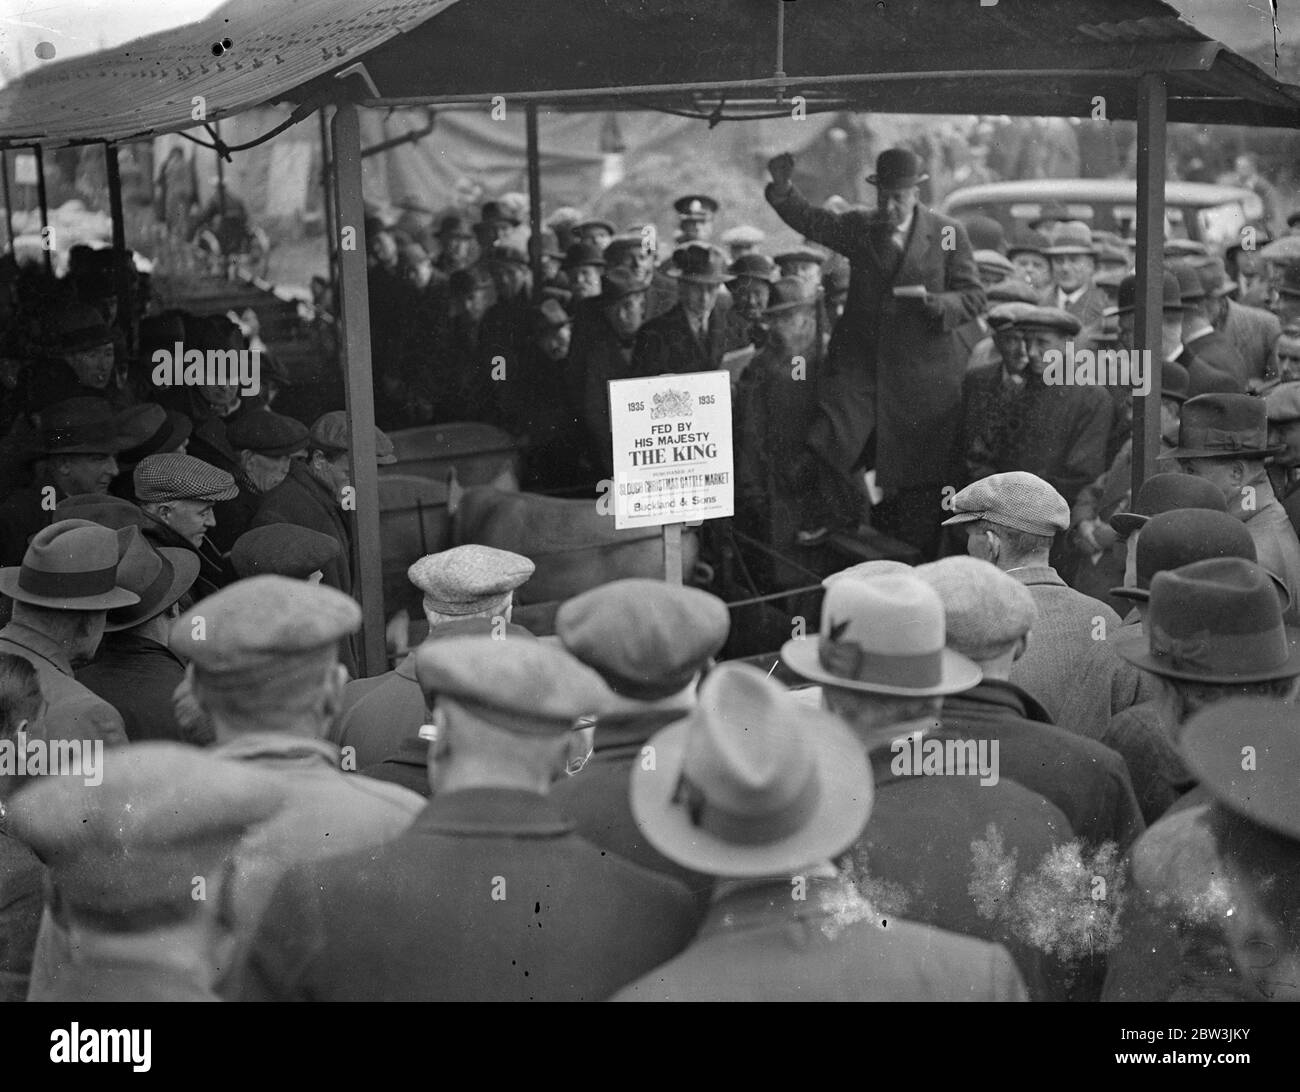 King ' s livestock auctioned at Slough christmas show . Pet stock from the Royal farms at Windsor were offfered for sale , by command of the King , at Slough Christmas Cattle show , when 30 fat cattle , 60 sheep and 50 pigs were sold by auction . There is always keen competition for the King ' s stock . Photo shows , auctioning the King ' s pigs . 10 December 1935 Stock Photo